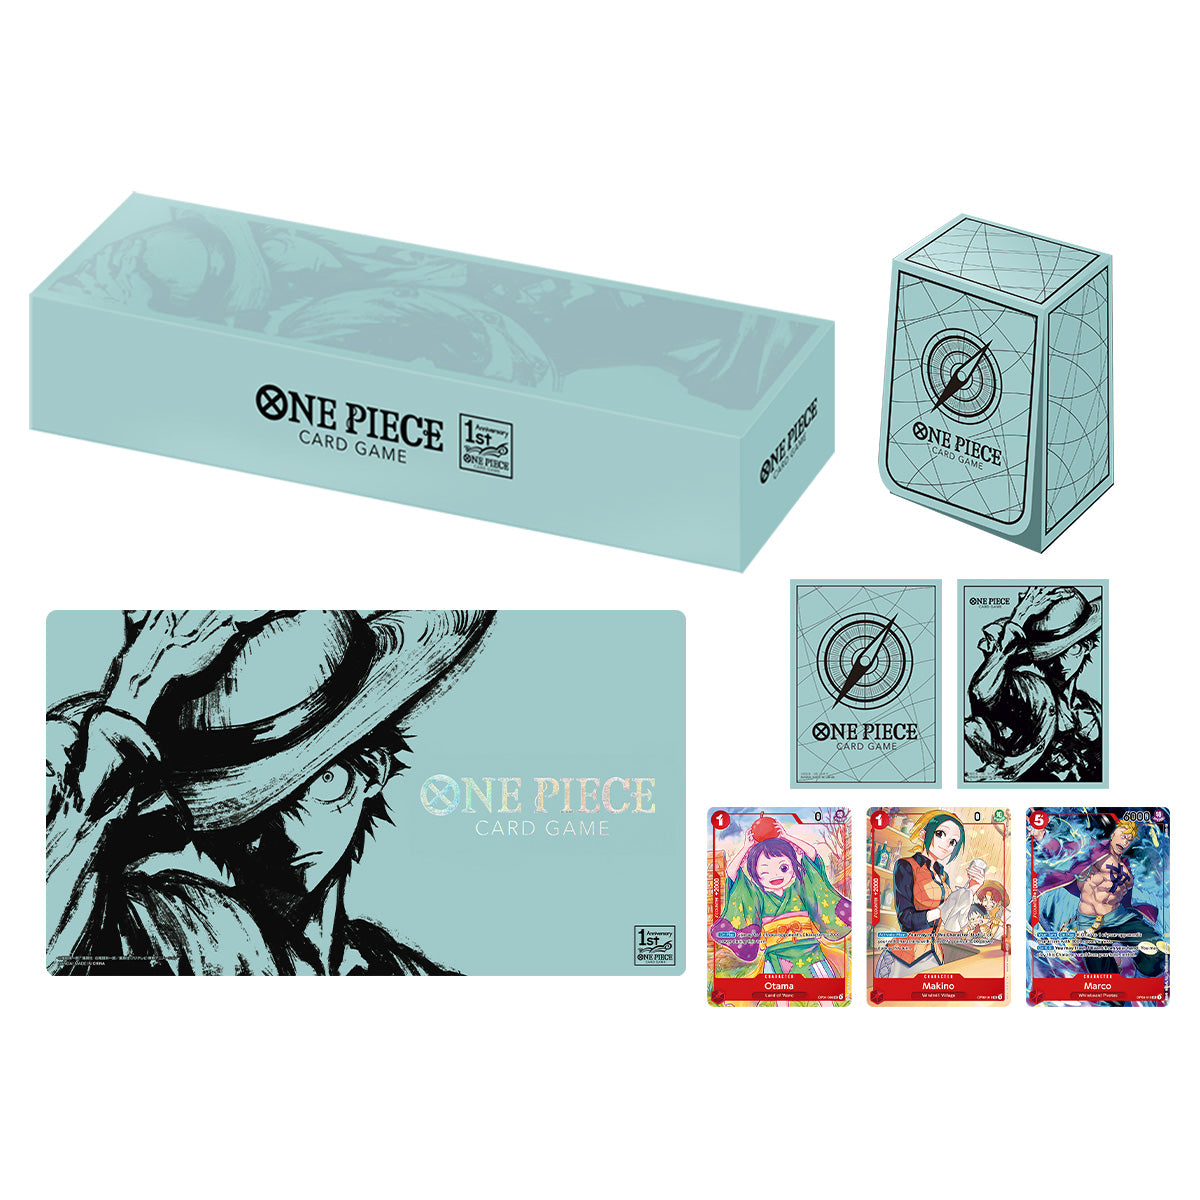 *PRE ORDER* One Piece Card Game - Japanese 1st Anniversary Set